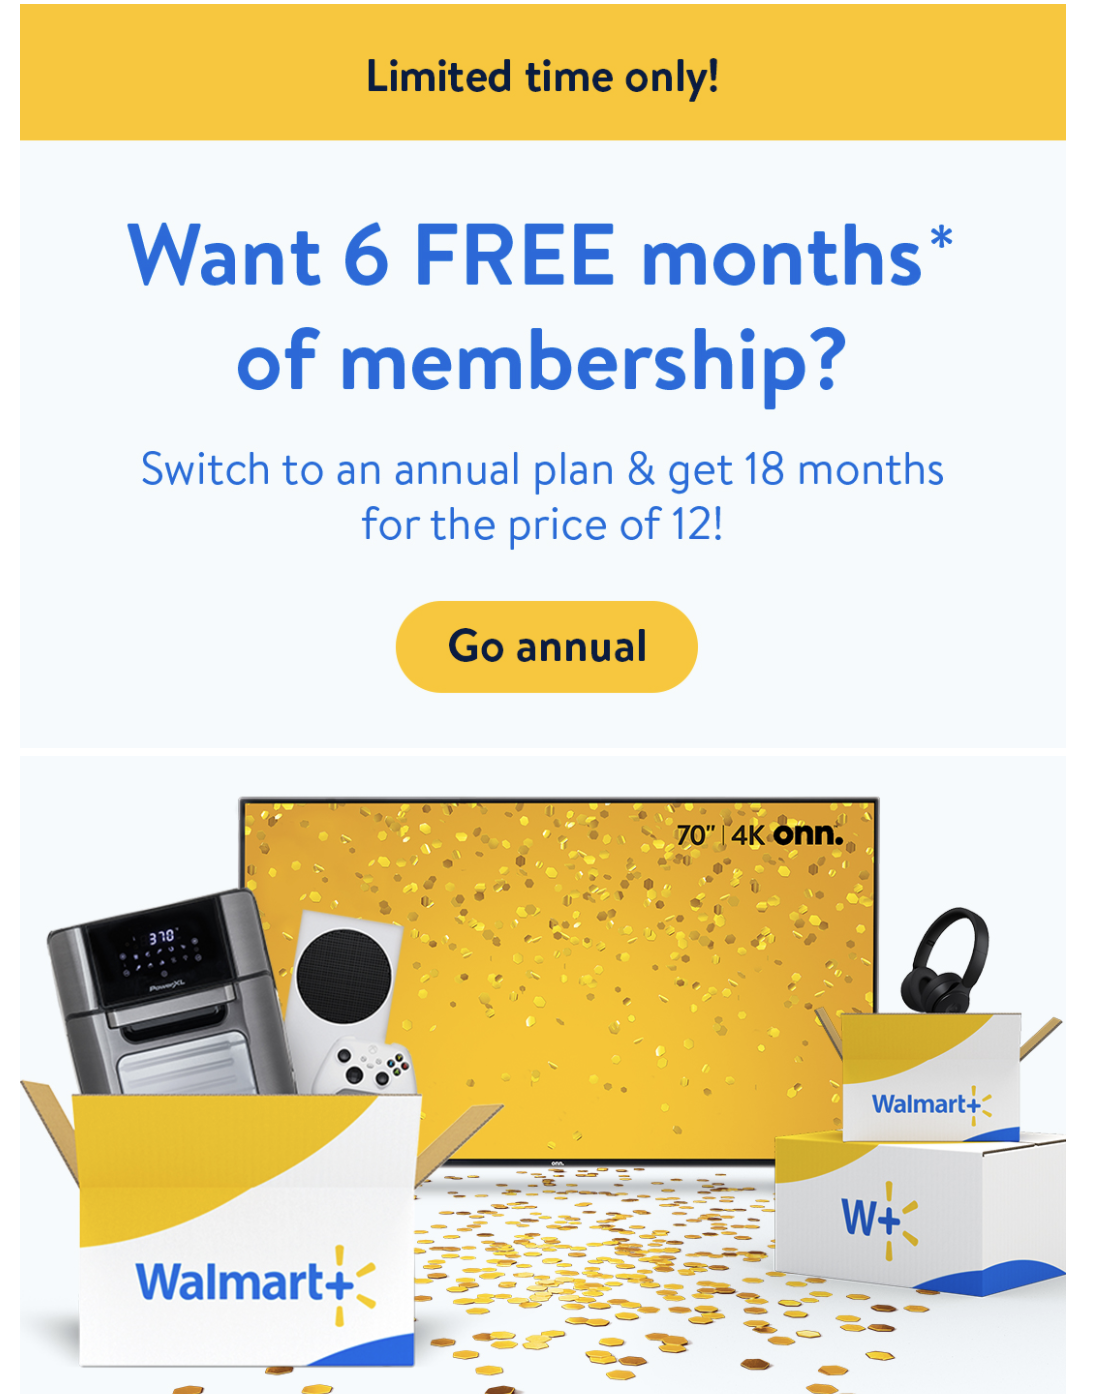 Walmart+ Switch to Annual Plan and Get 6 FREE months of membership YMMV